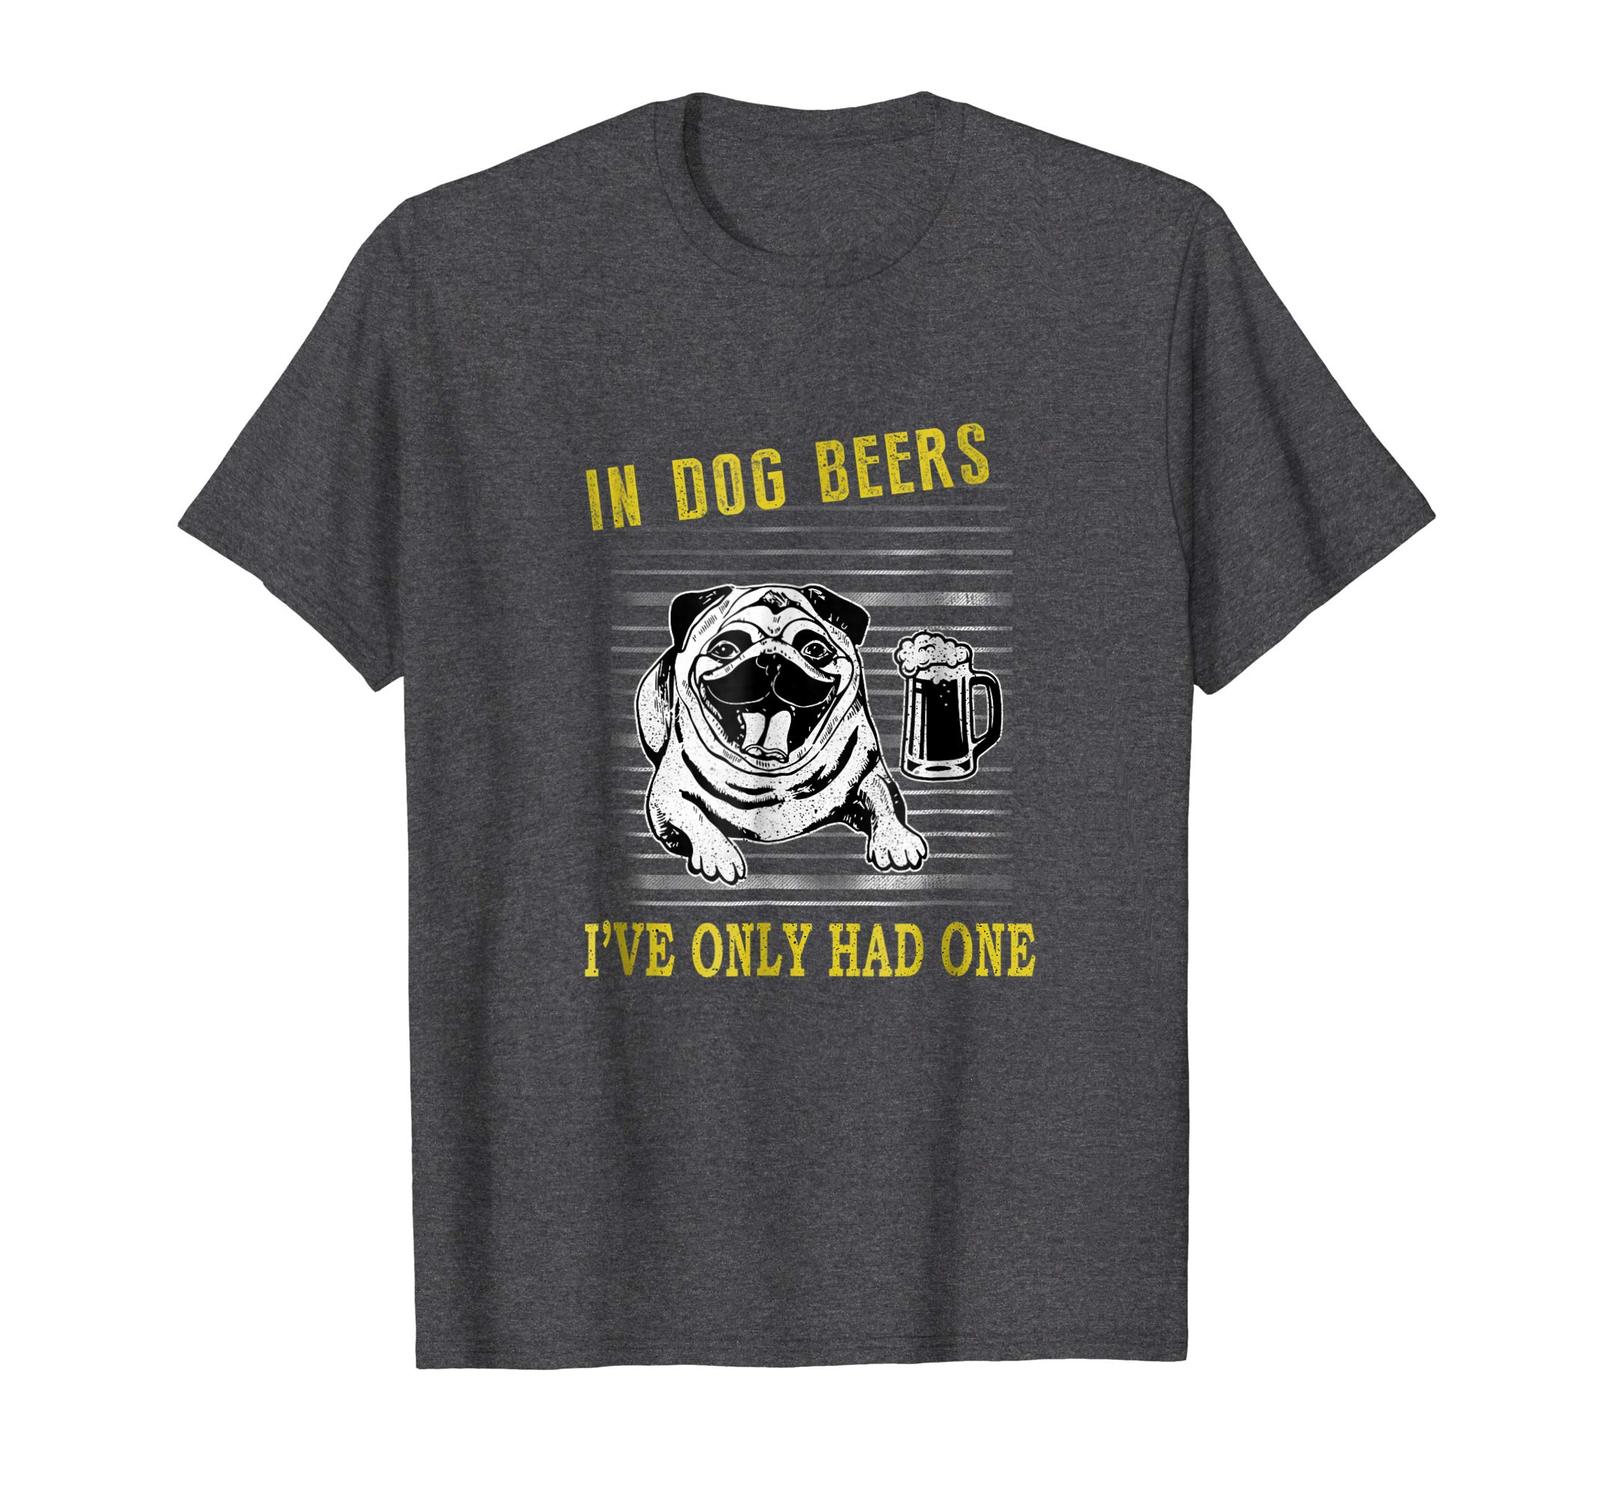 Dog Fashion - In dog beers I've only had one PUG shirt Funny Beer Tee ...